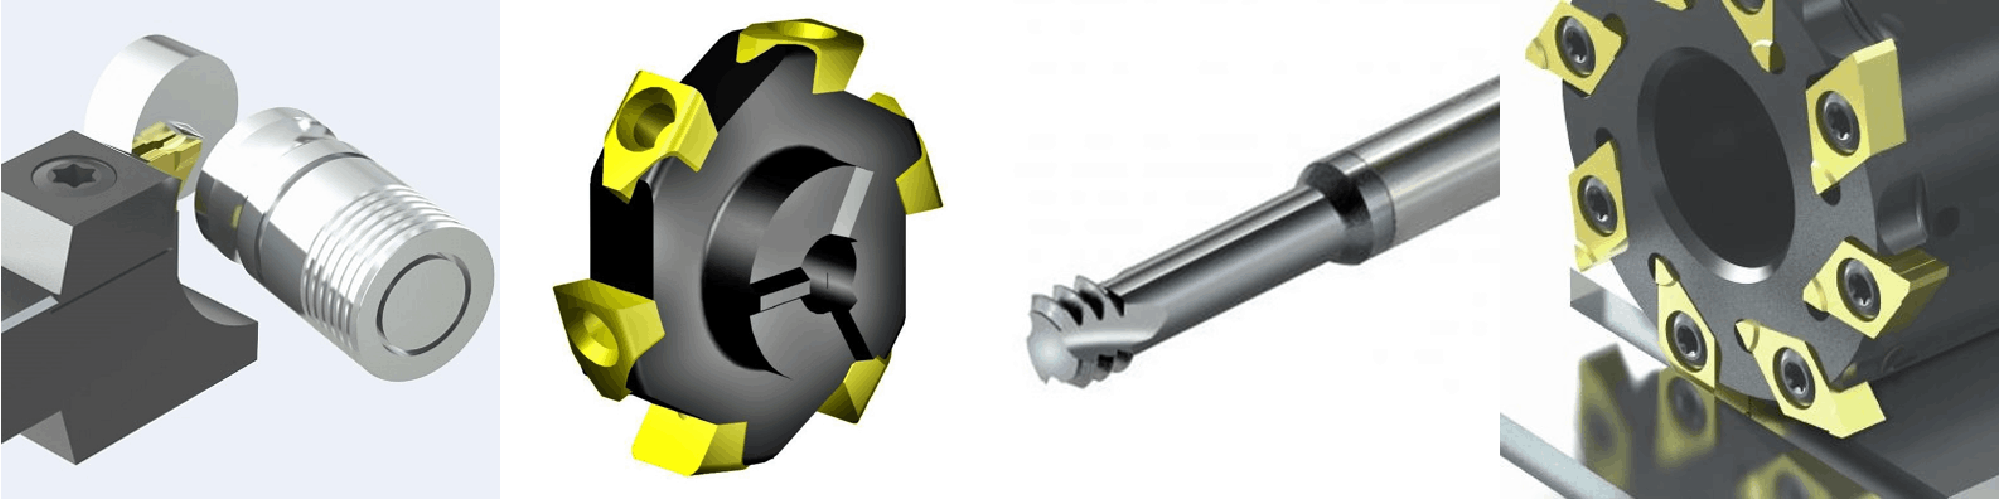 Precision Cutting Tools by Premier Form Tools